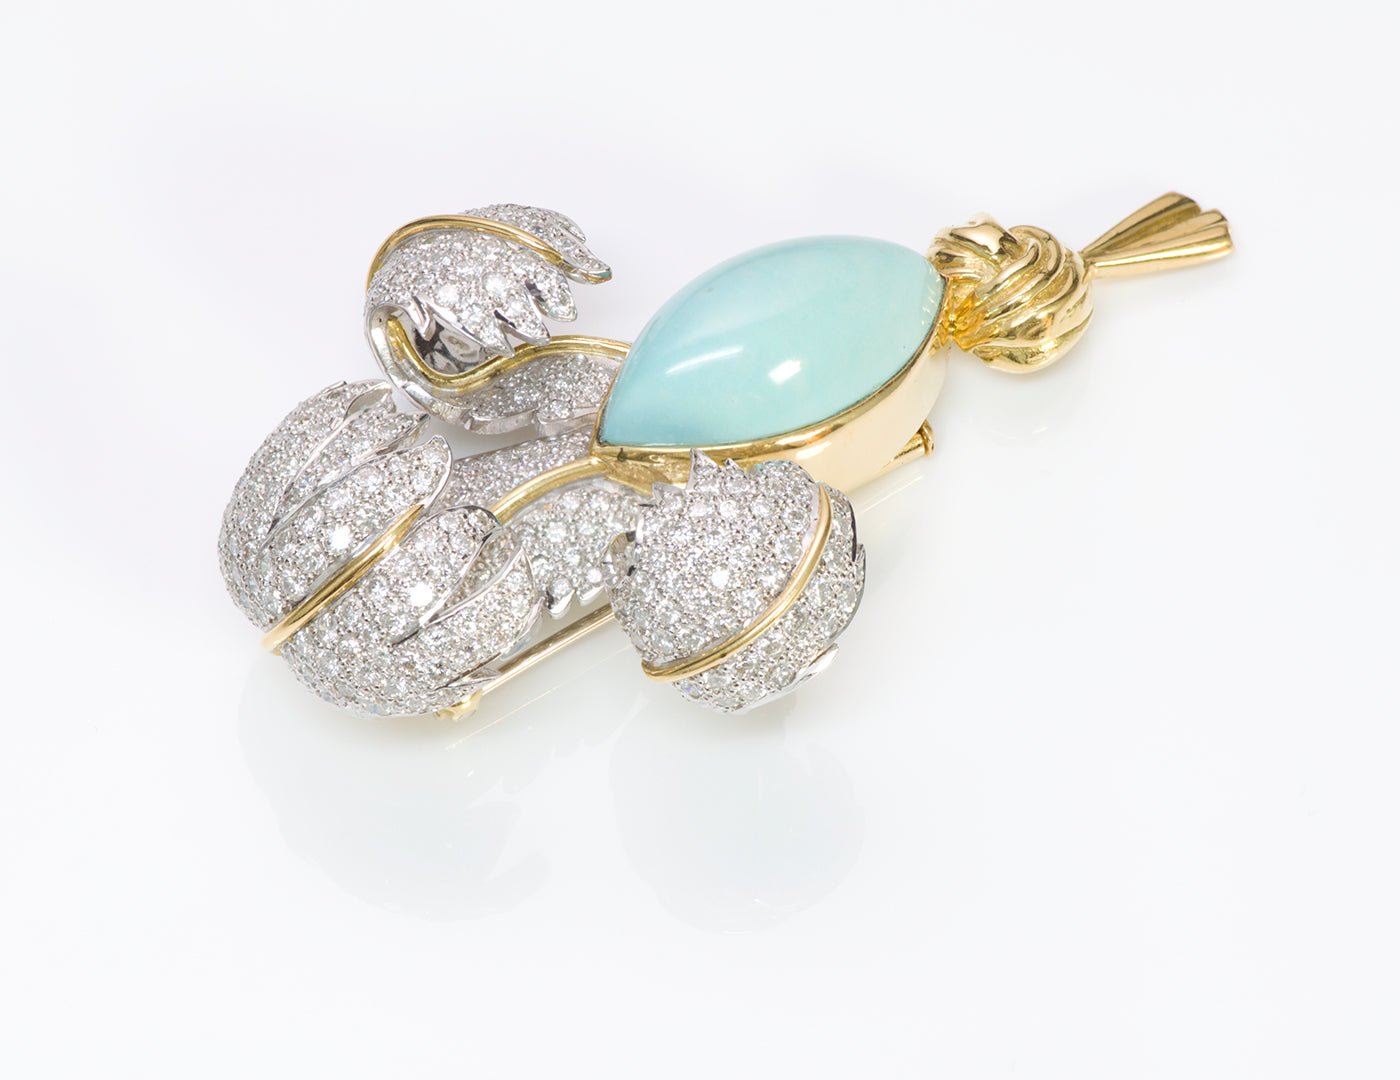 Elizabeth Gage Prince of Wales's Feathers Diamond Turquoise Gold Brooch